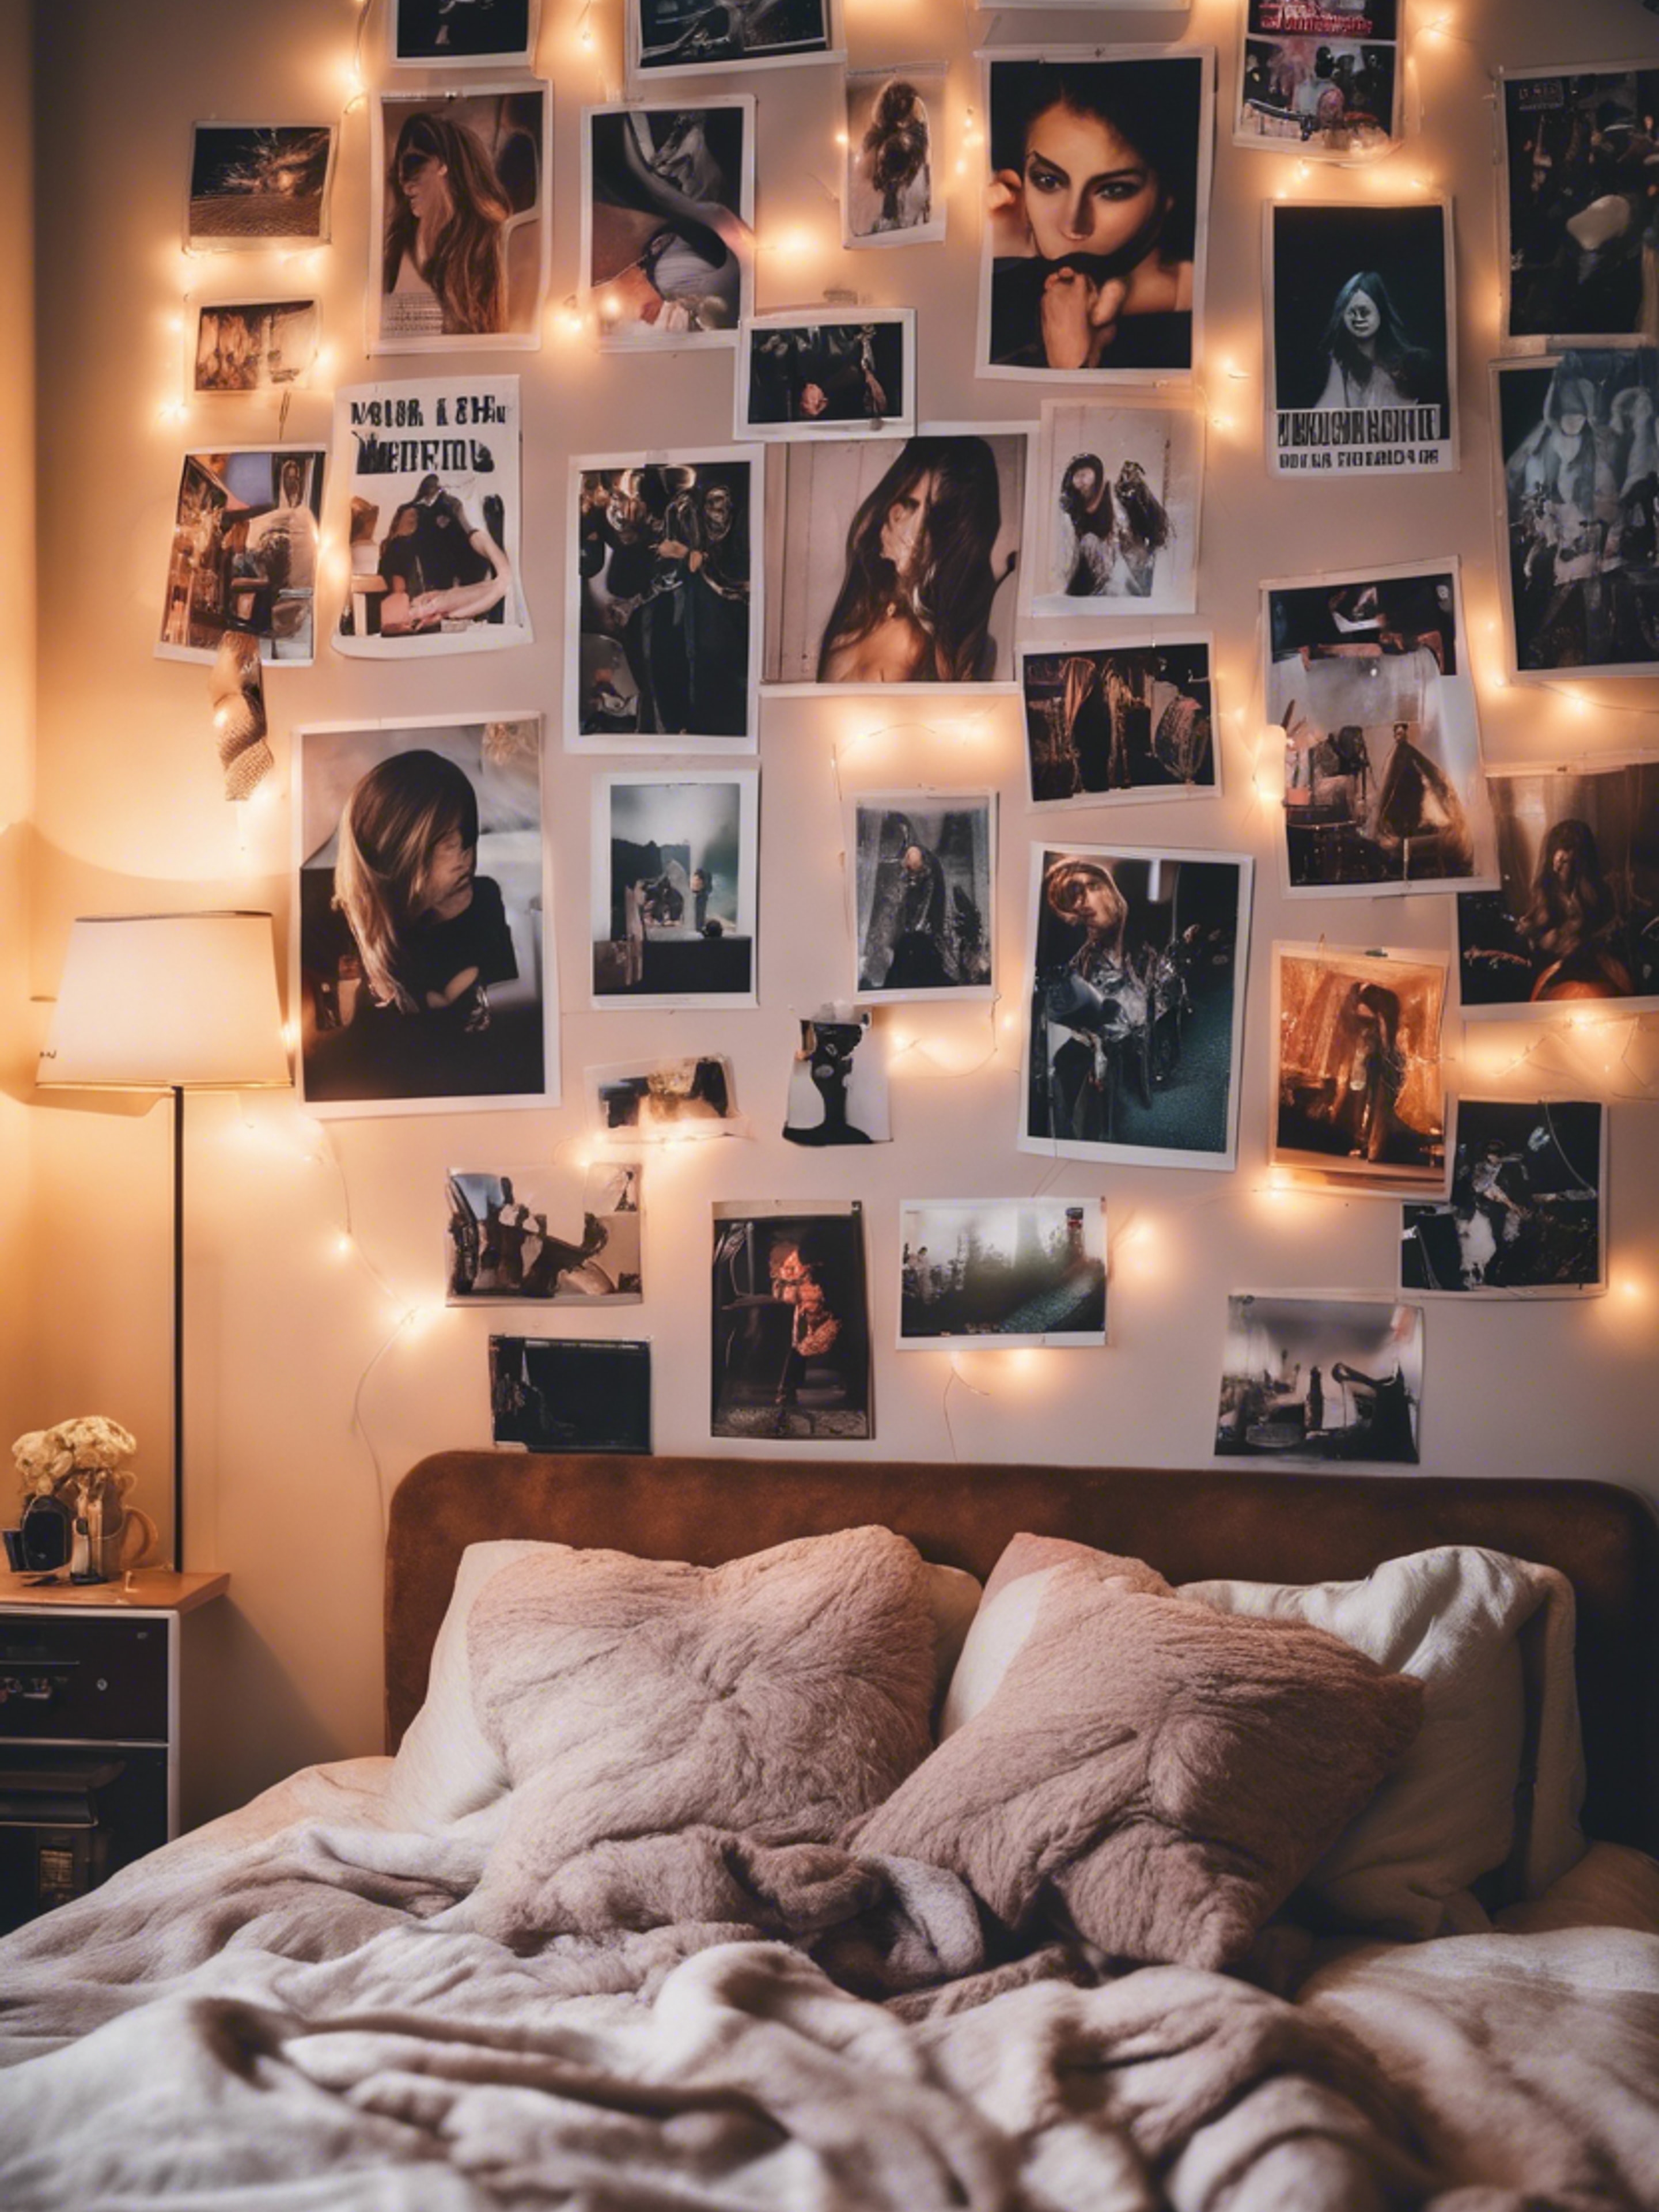 A modern and stylish teenage girl's room decorated with band posters, fairy lights, and polaroid pictures. ផ្ទាំង​រូបភាព[8dbab99d18ae495d873b]